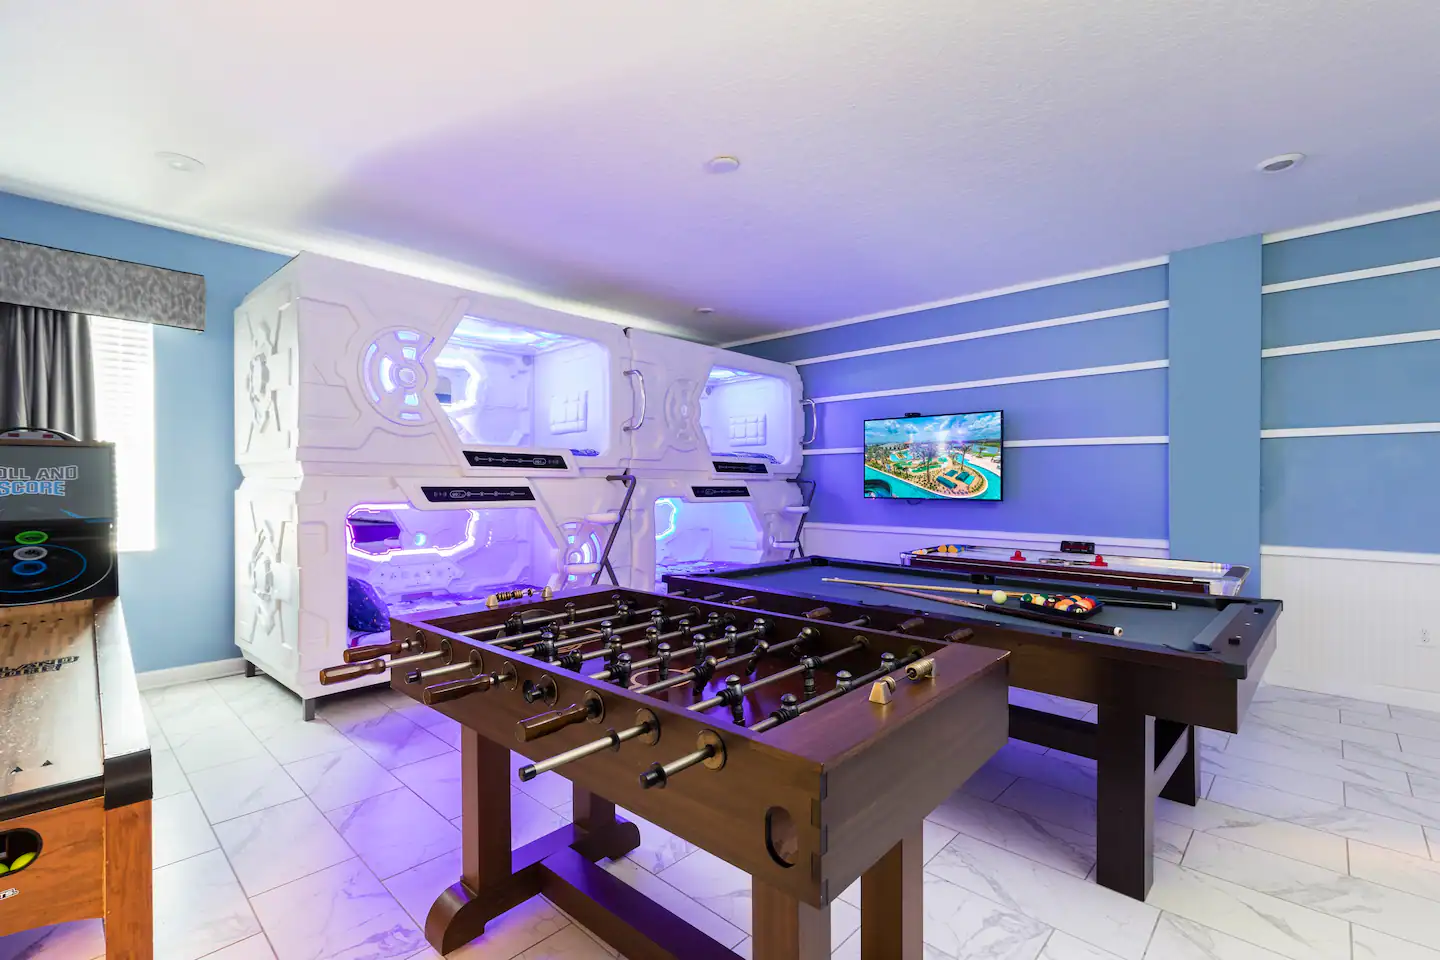 This room is packed with games and activites for you.